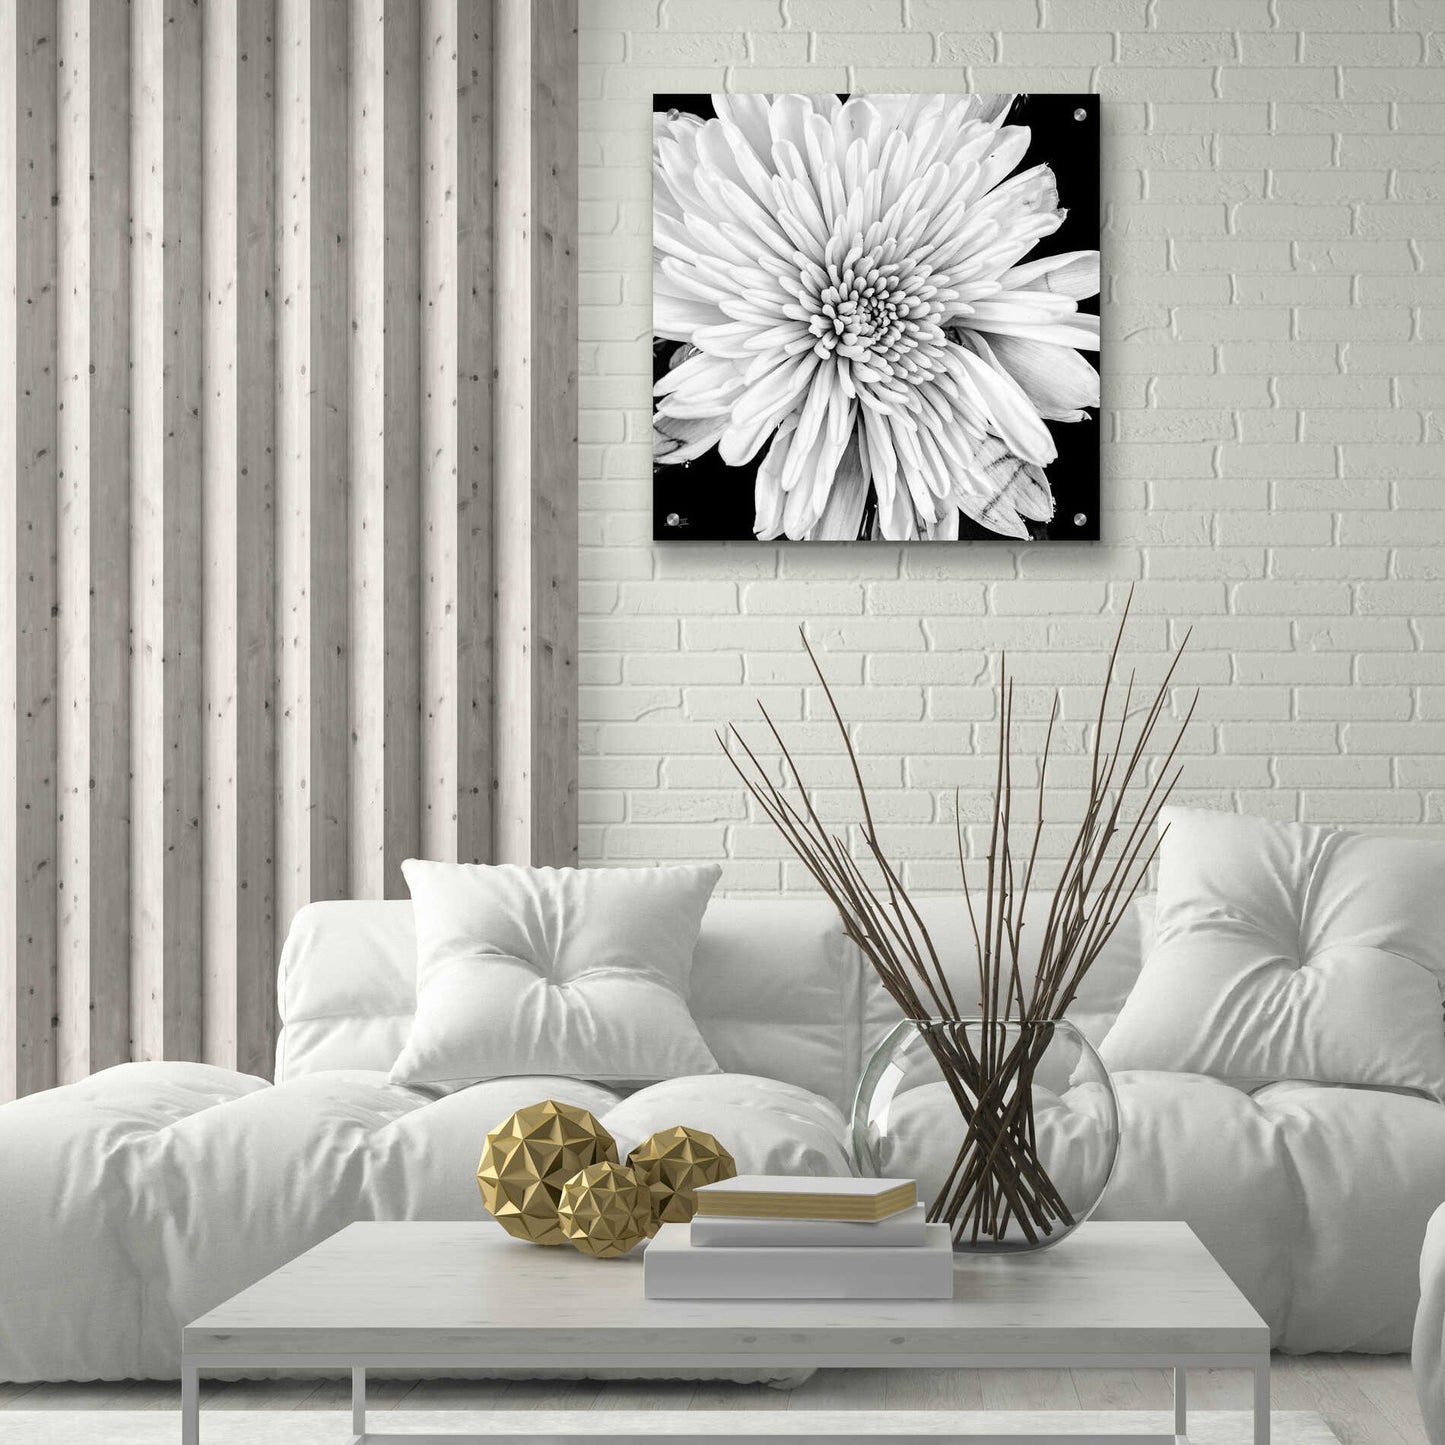 Epic Art 'Black and White Love II' by Donnie Quillen, Acrylic Glass Wall Art,24x24